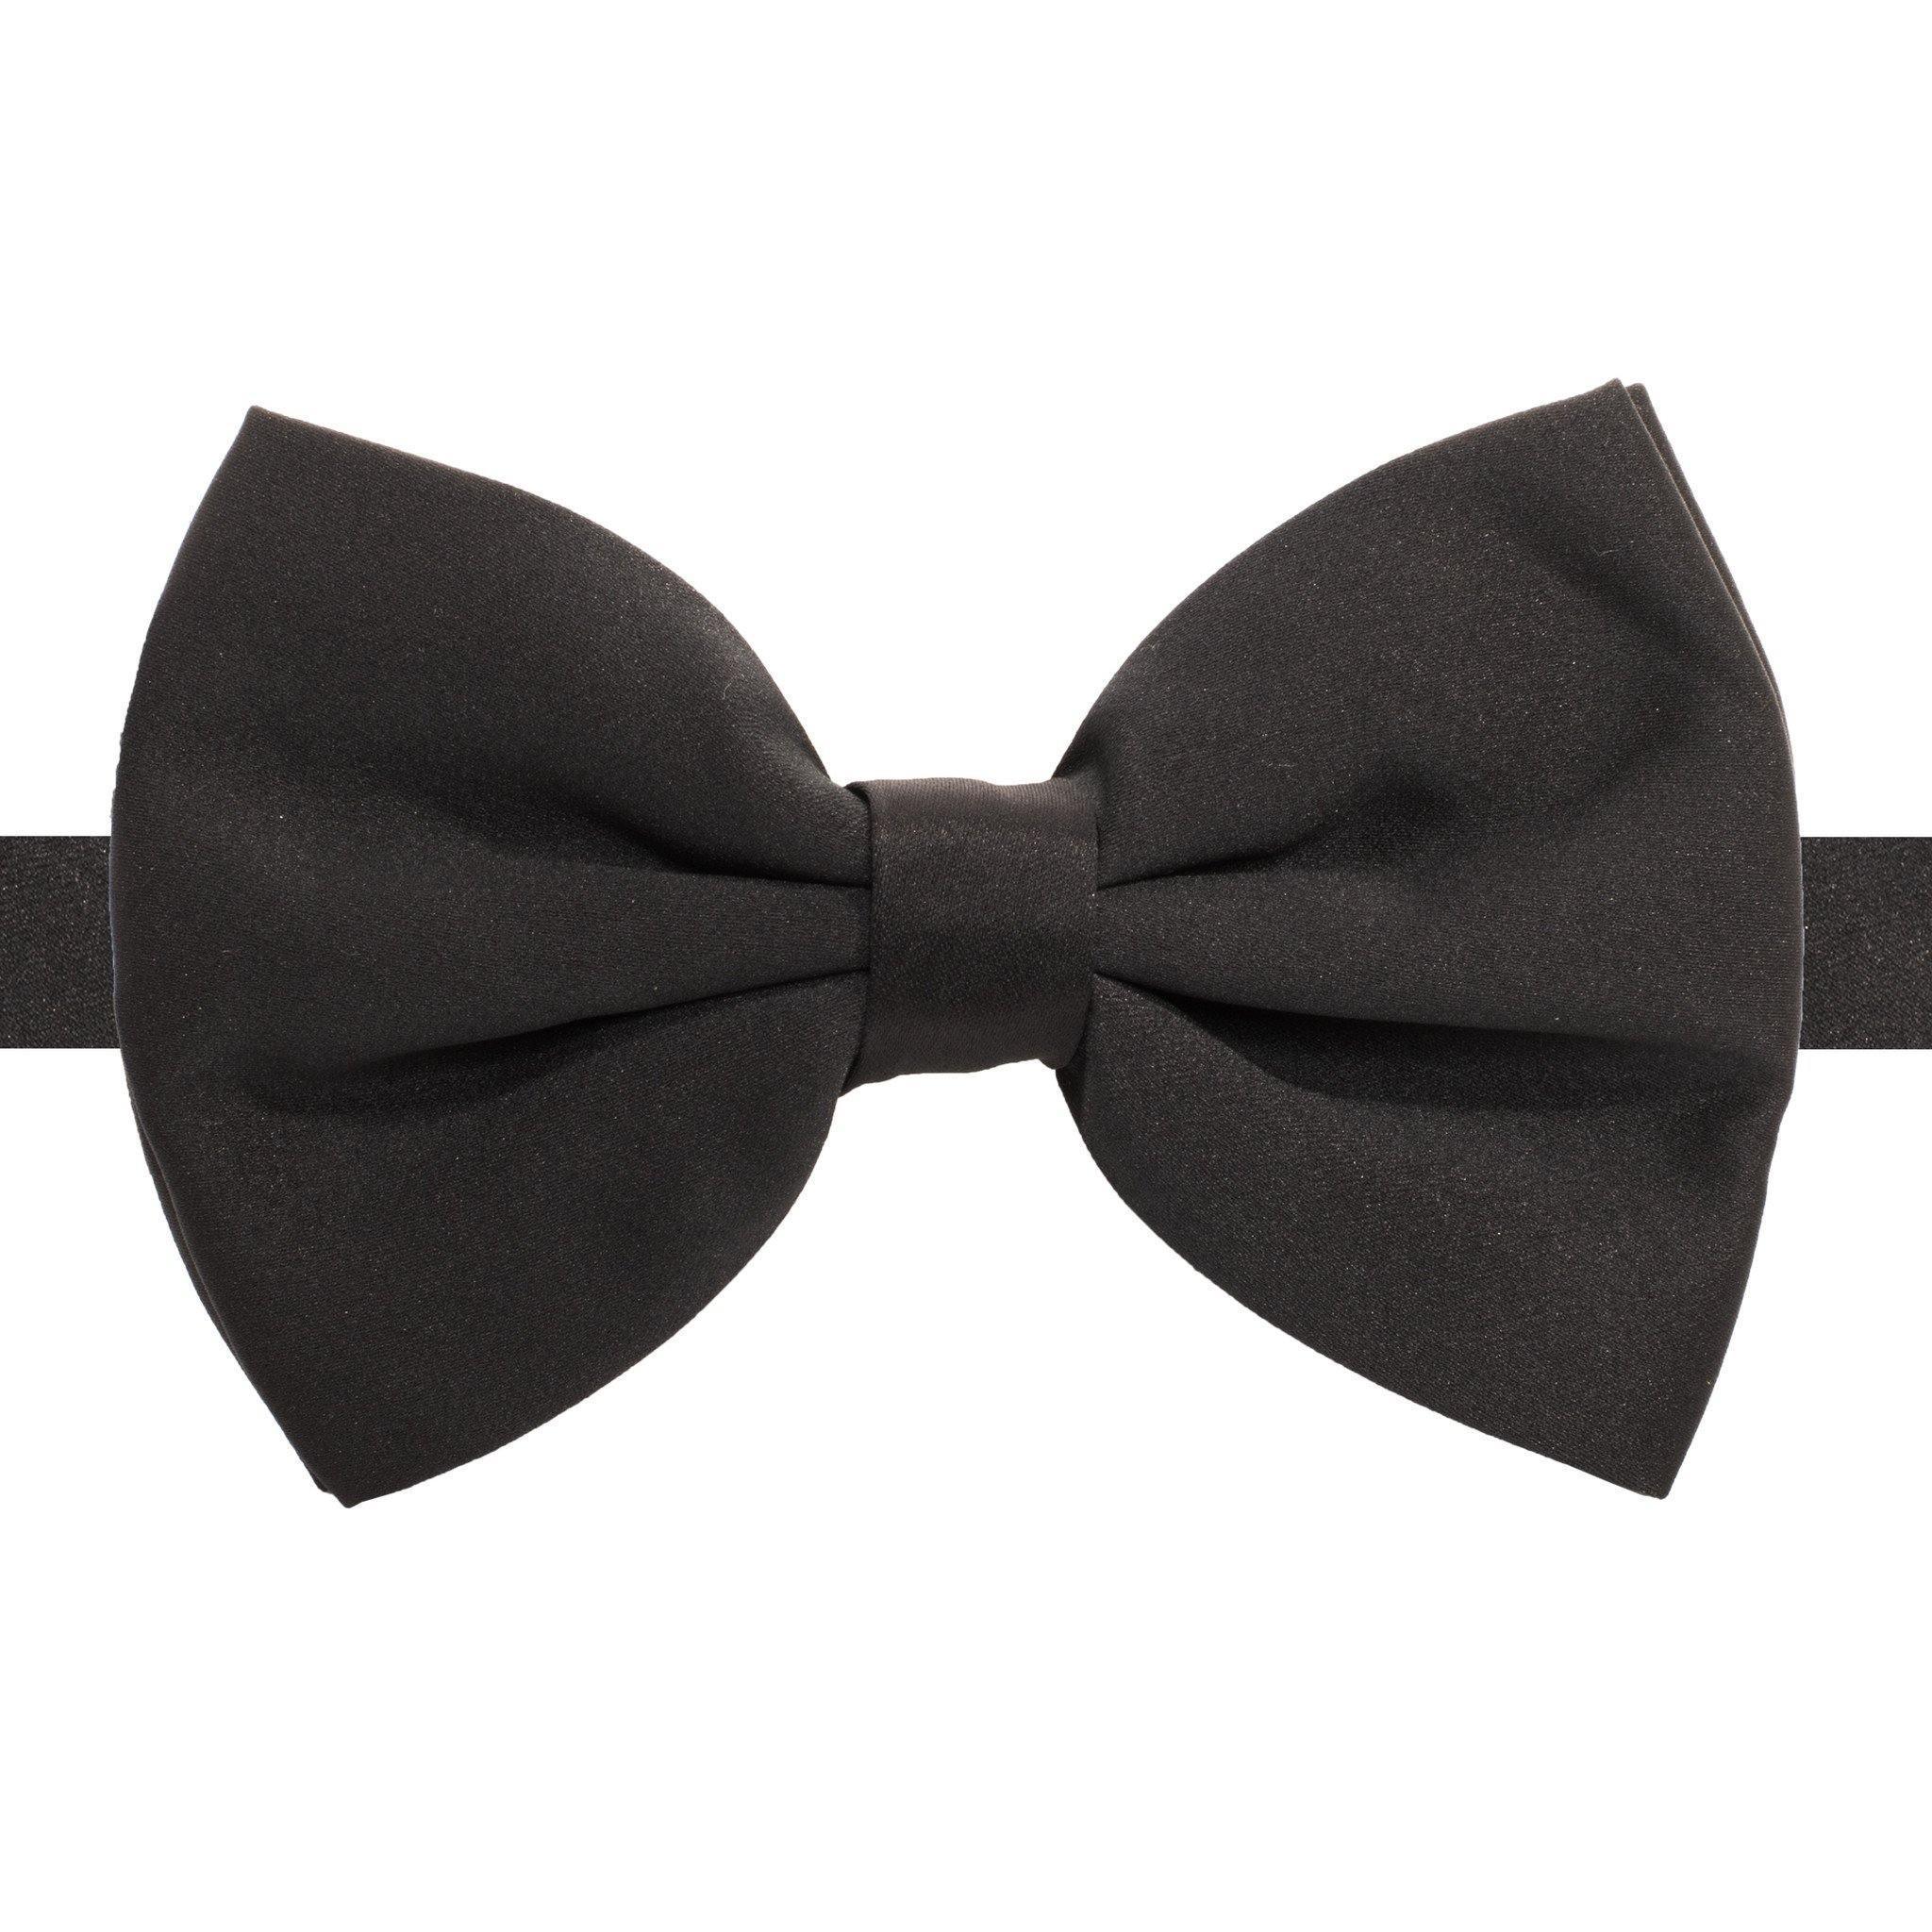 Bow Ties – Upscale Men's Fashion